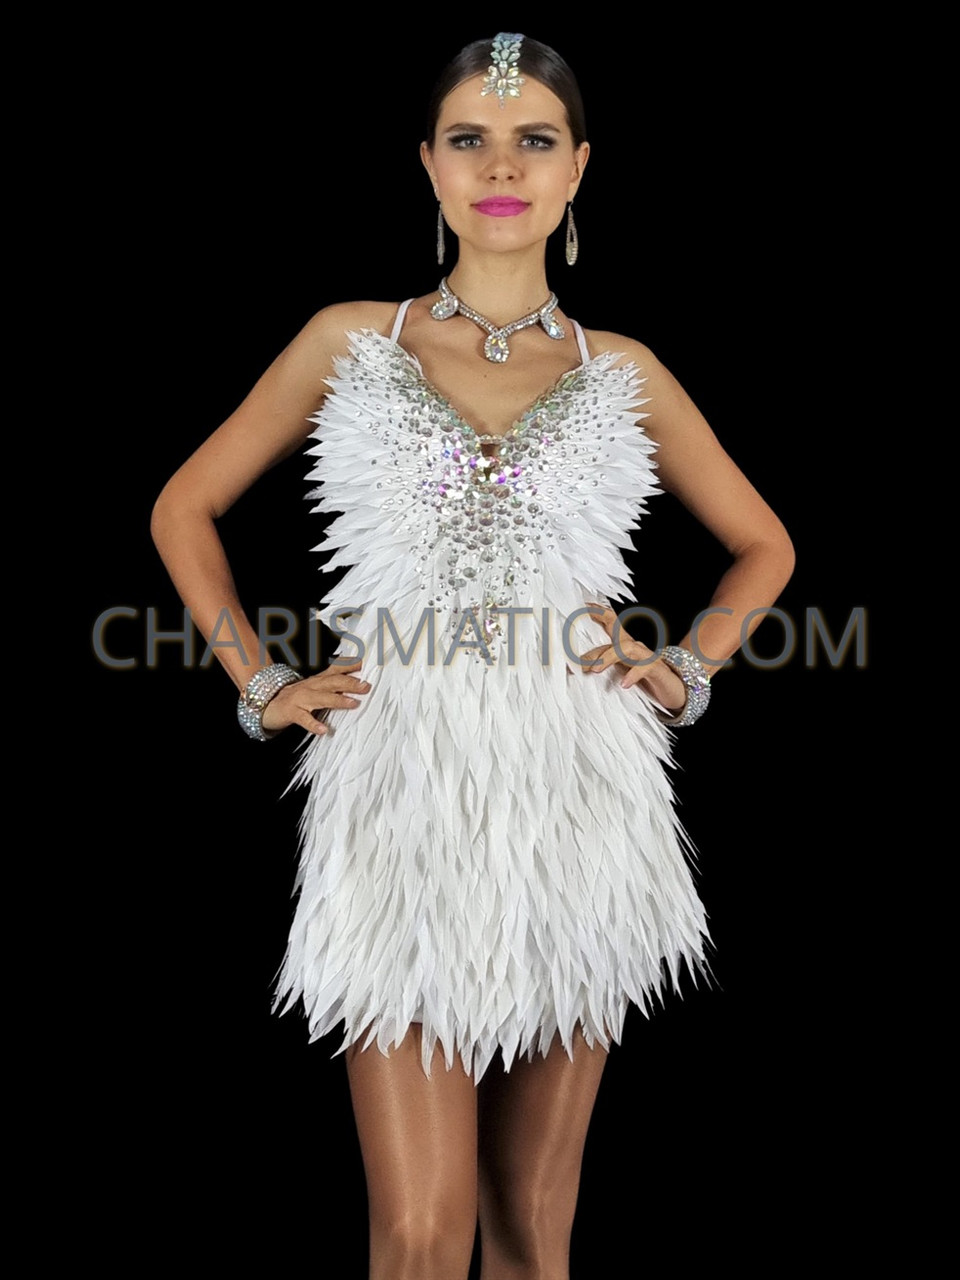 Angelic White Feather Dress with Crystal Embellishments